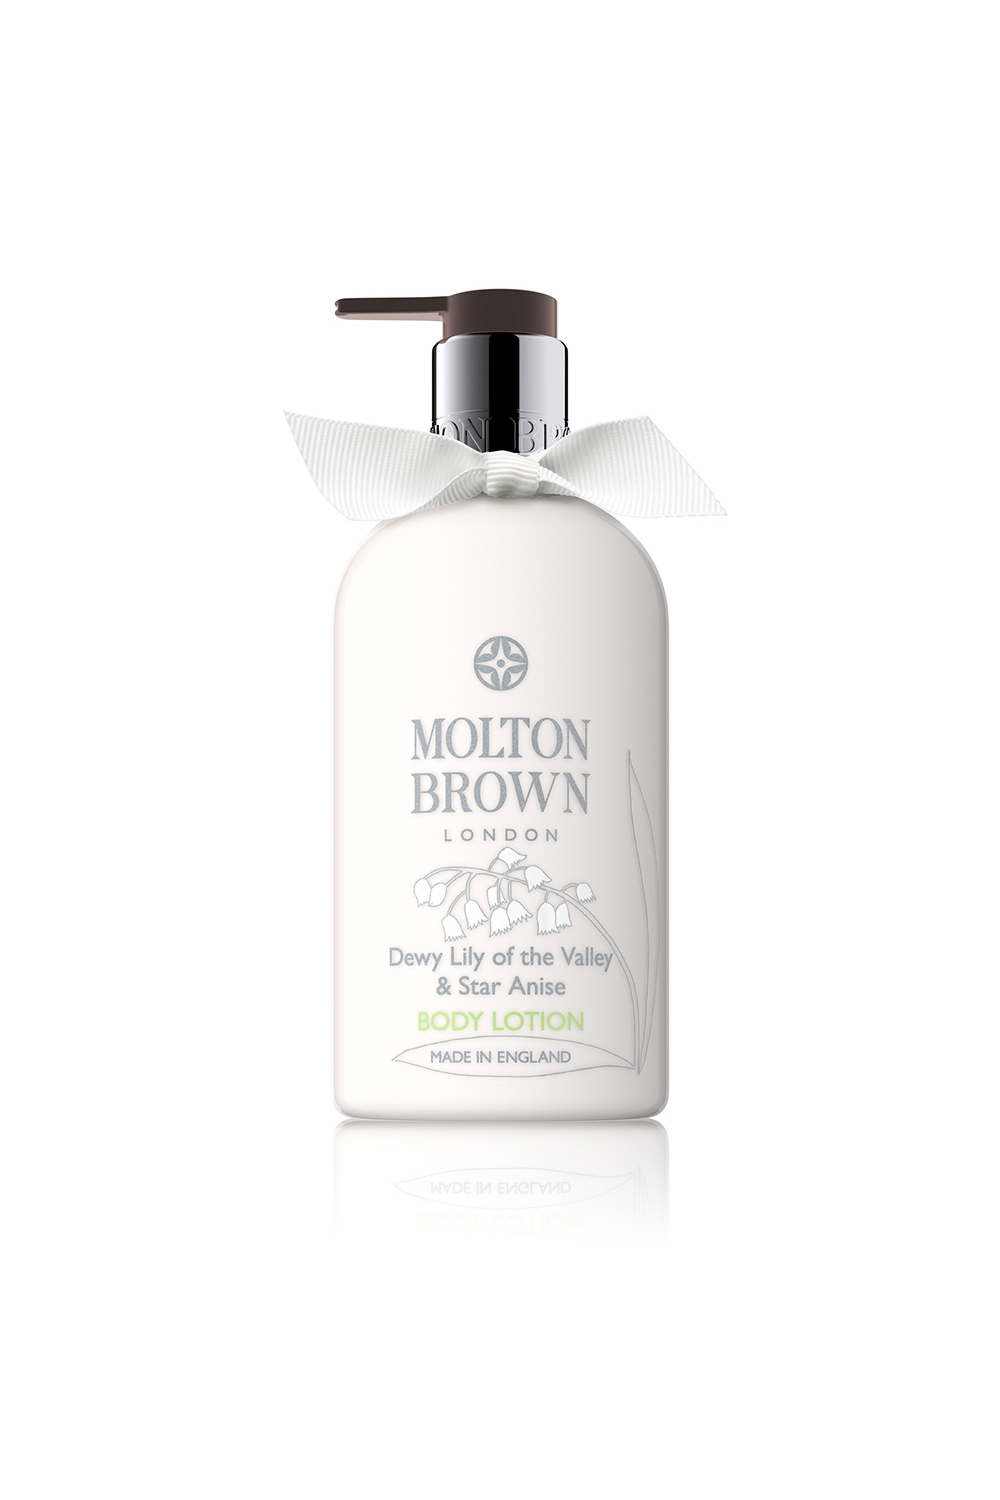 MOLTON BROWN – Κρέμα σώματος Dewy Lily of the Valley & Star Anise- 300ml 1534868.0-0000